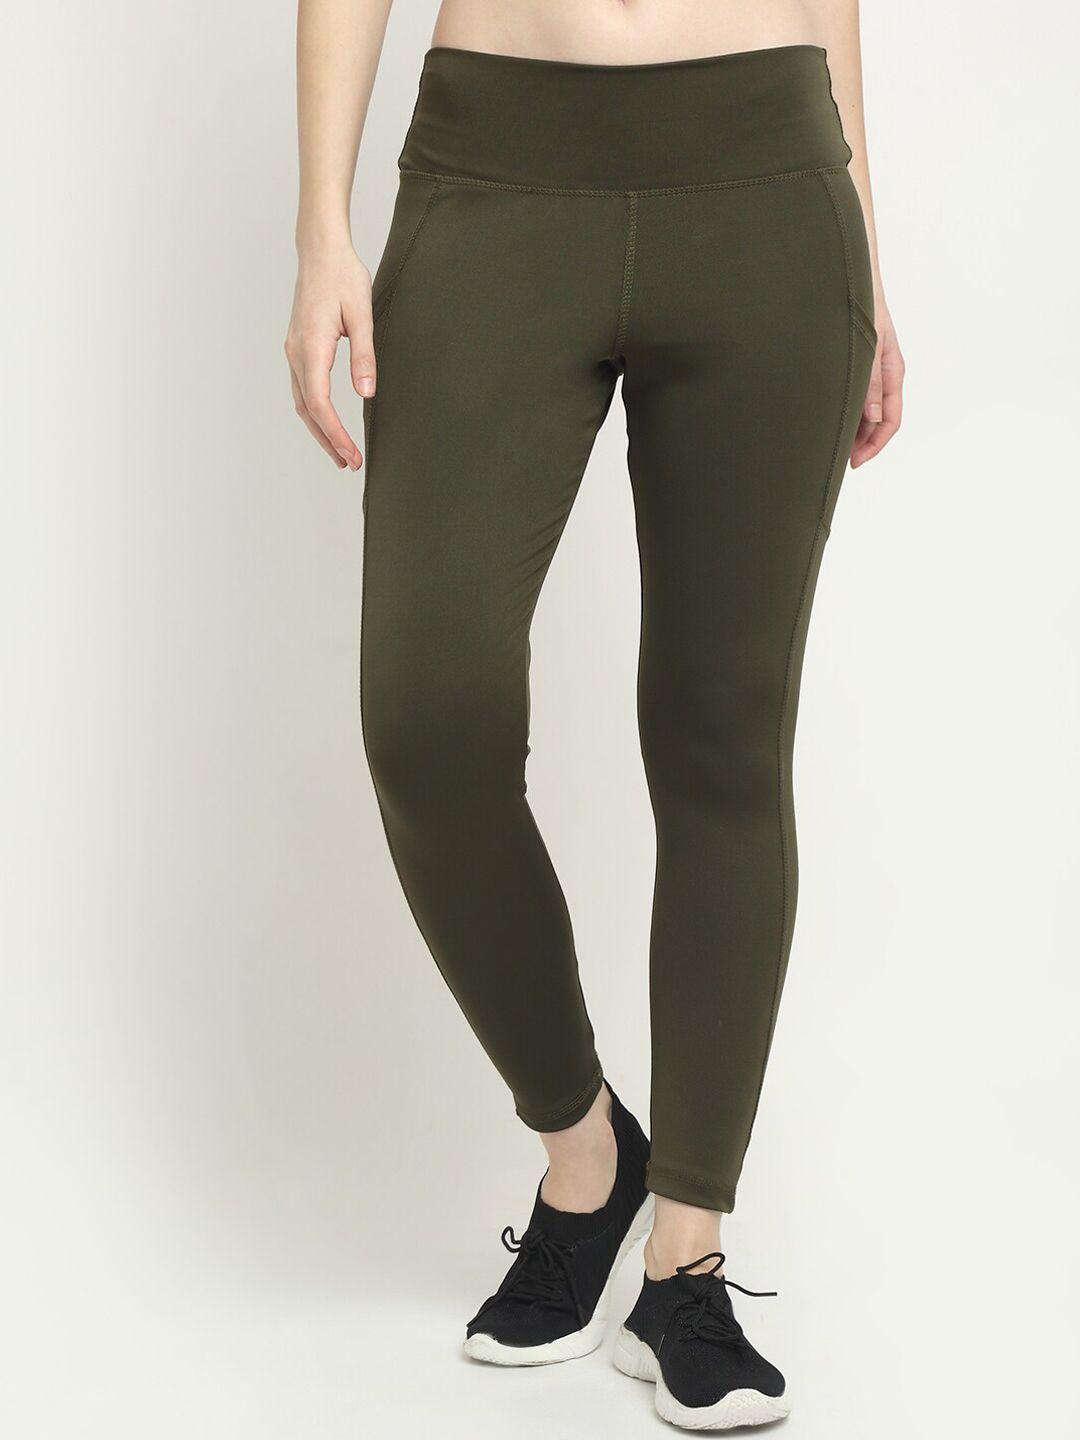 everdion-women-olive-green-coloured-solid-slim-fit-tights